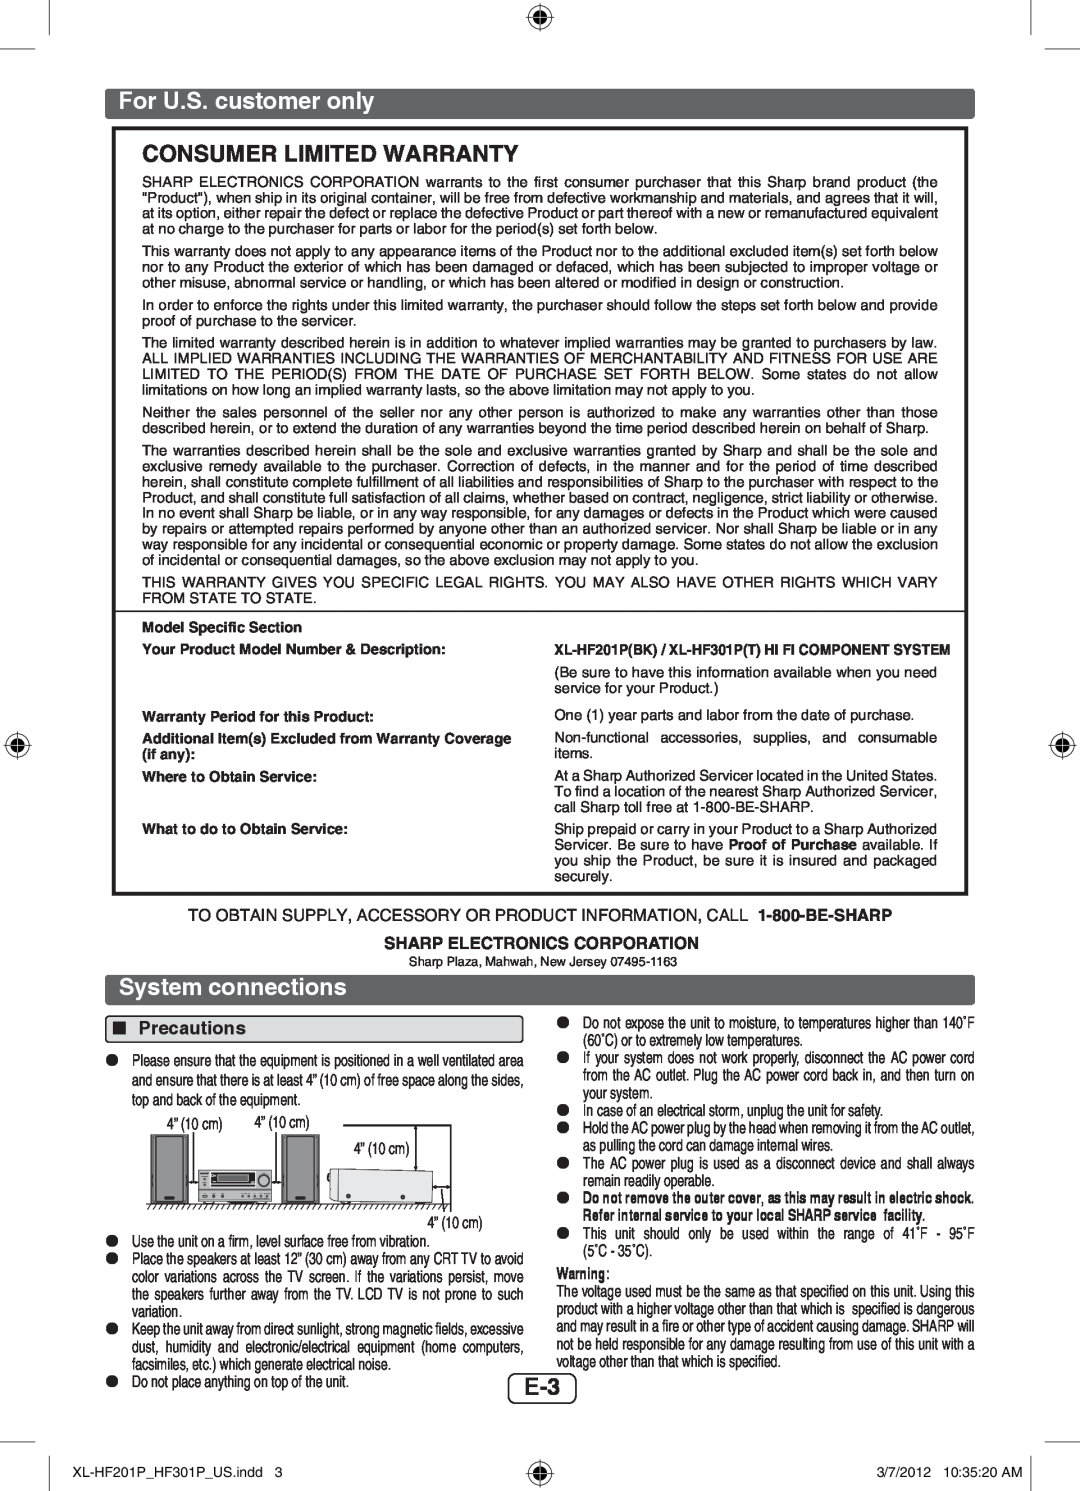 Sharp XLHF201P operation manual For U.S. customer only, Consumer Limited Warranty, System connections, Precautions 